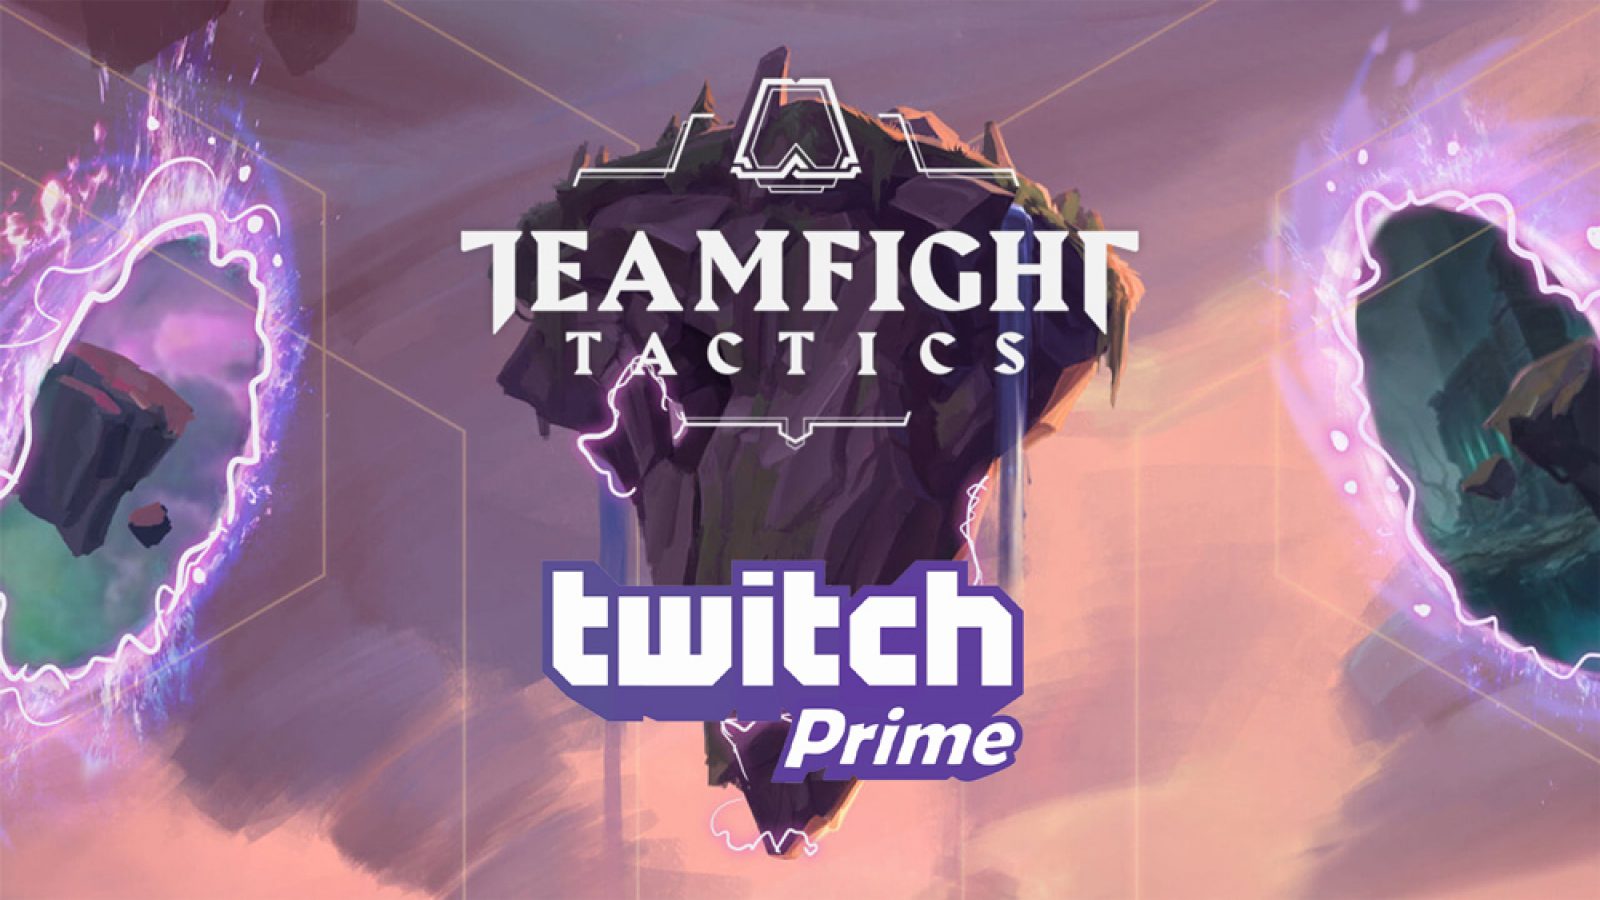 Teamfight Tactics: How to claim free Little Legends with Twitch